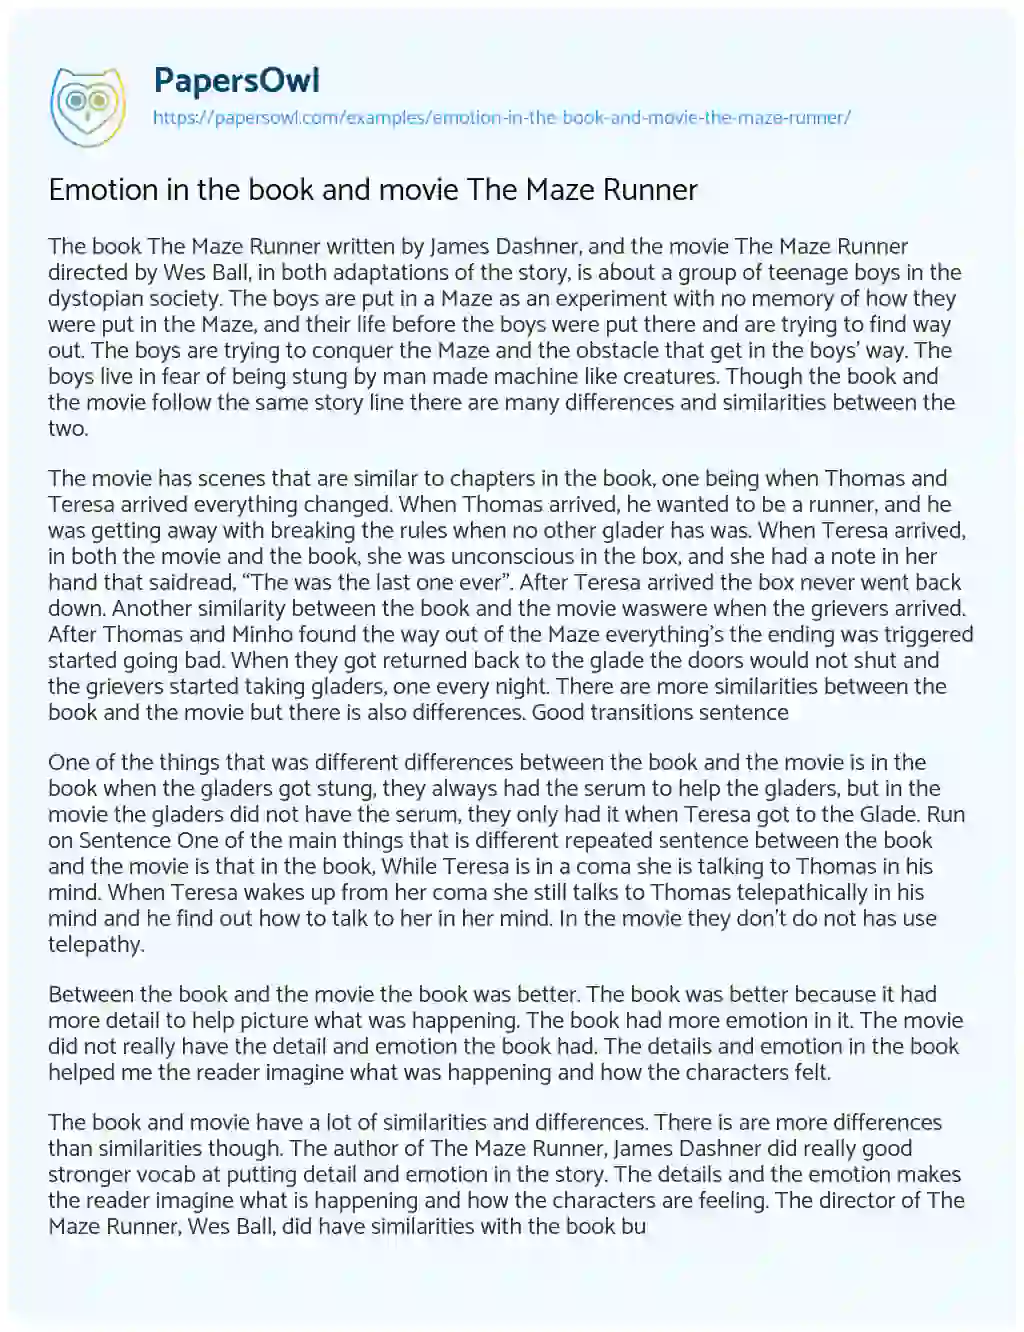 Essay on Emotion in the Book and Movie the Maze Runner